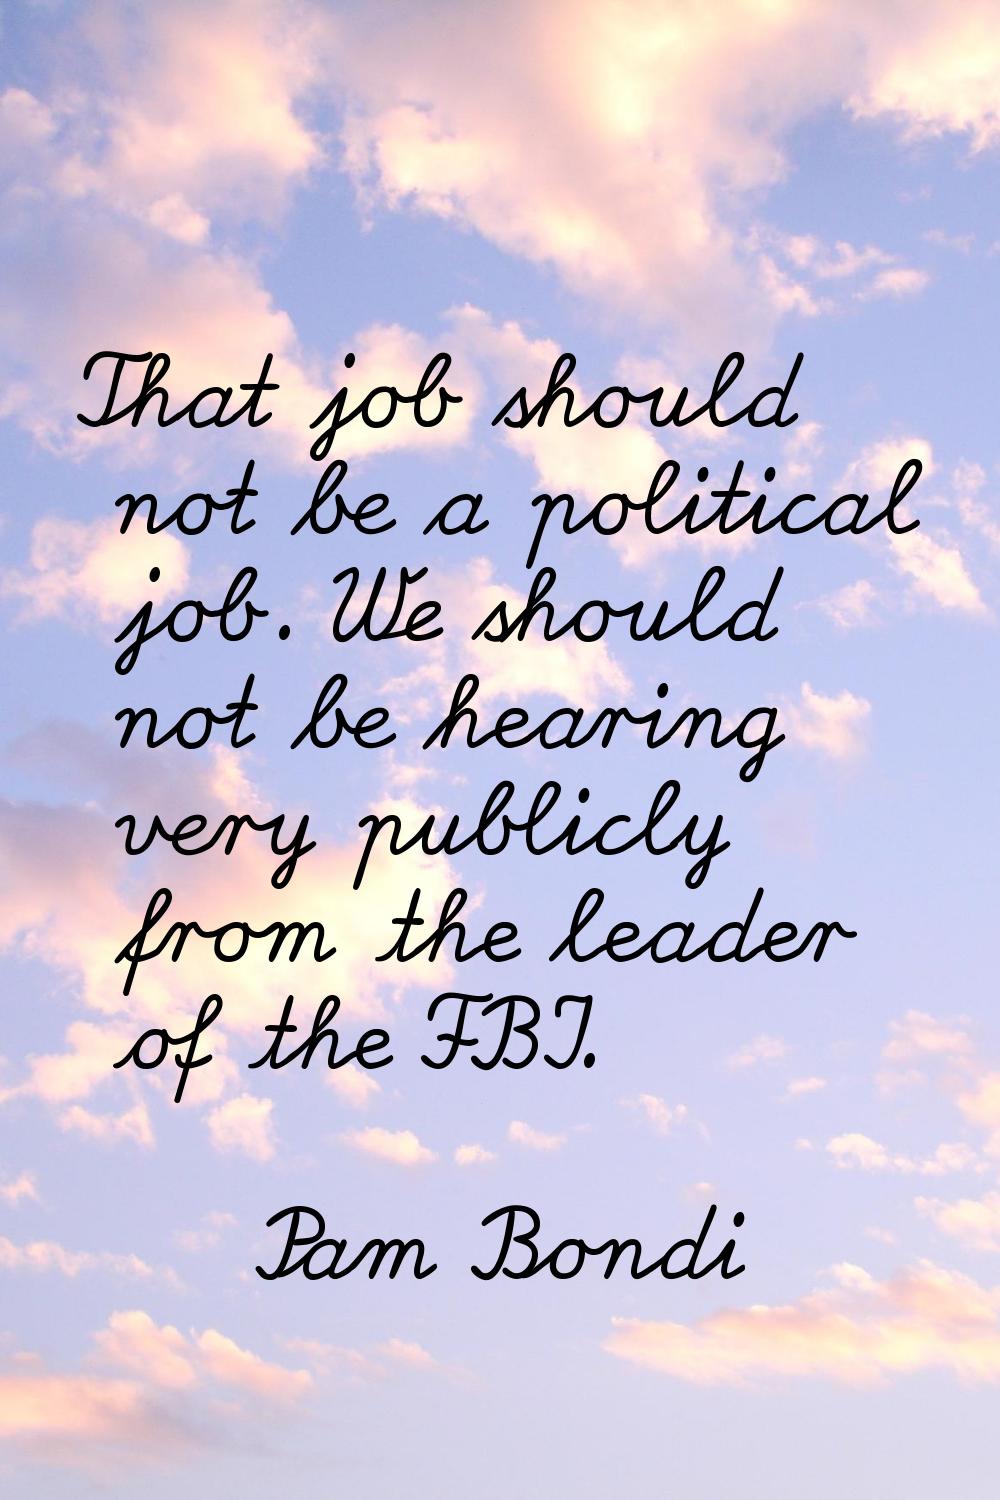 That job should not be a political job. We should not be hearing very publicly from the leader of t